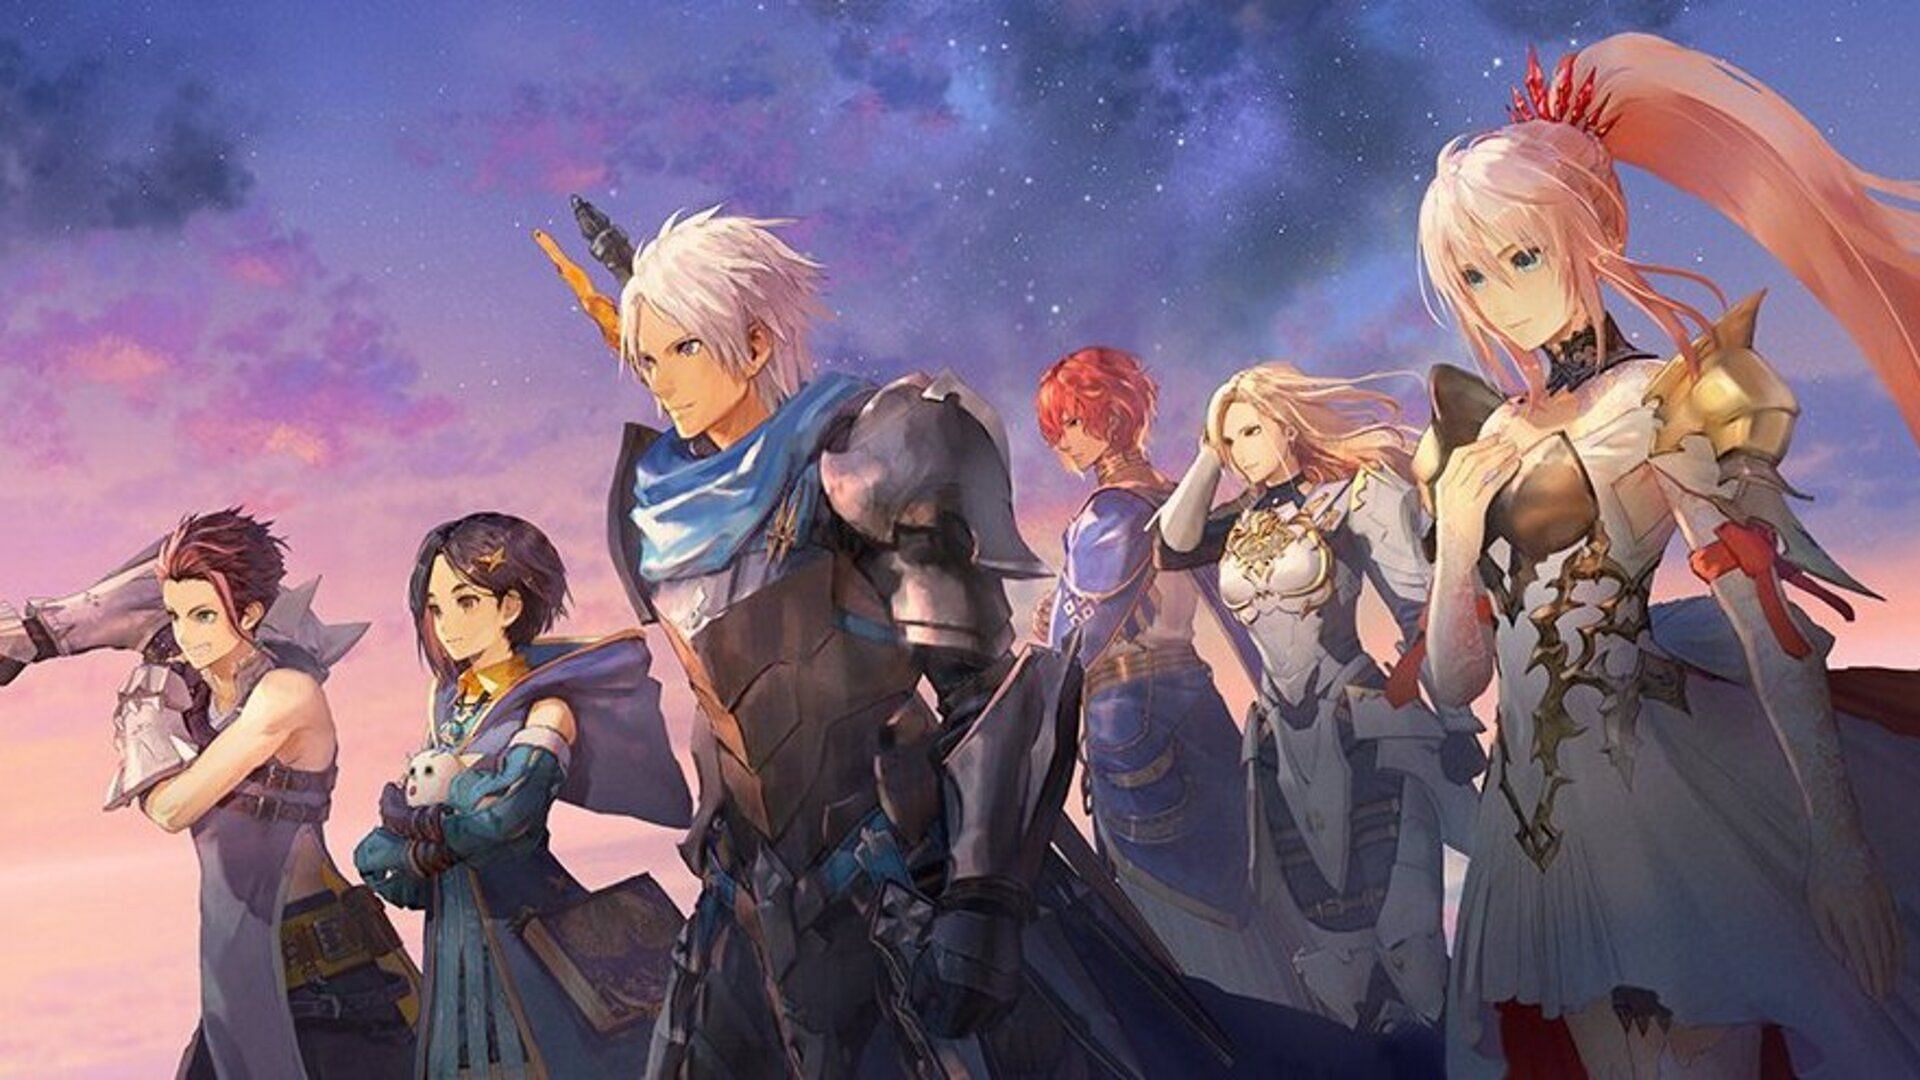 Tales of Arise | Anime, Character art, Tales of zestiria